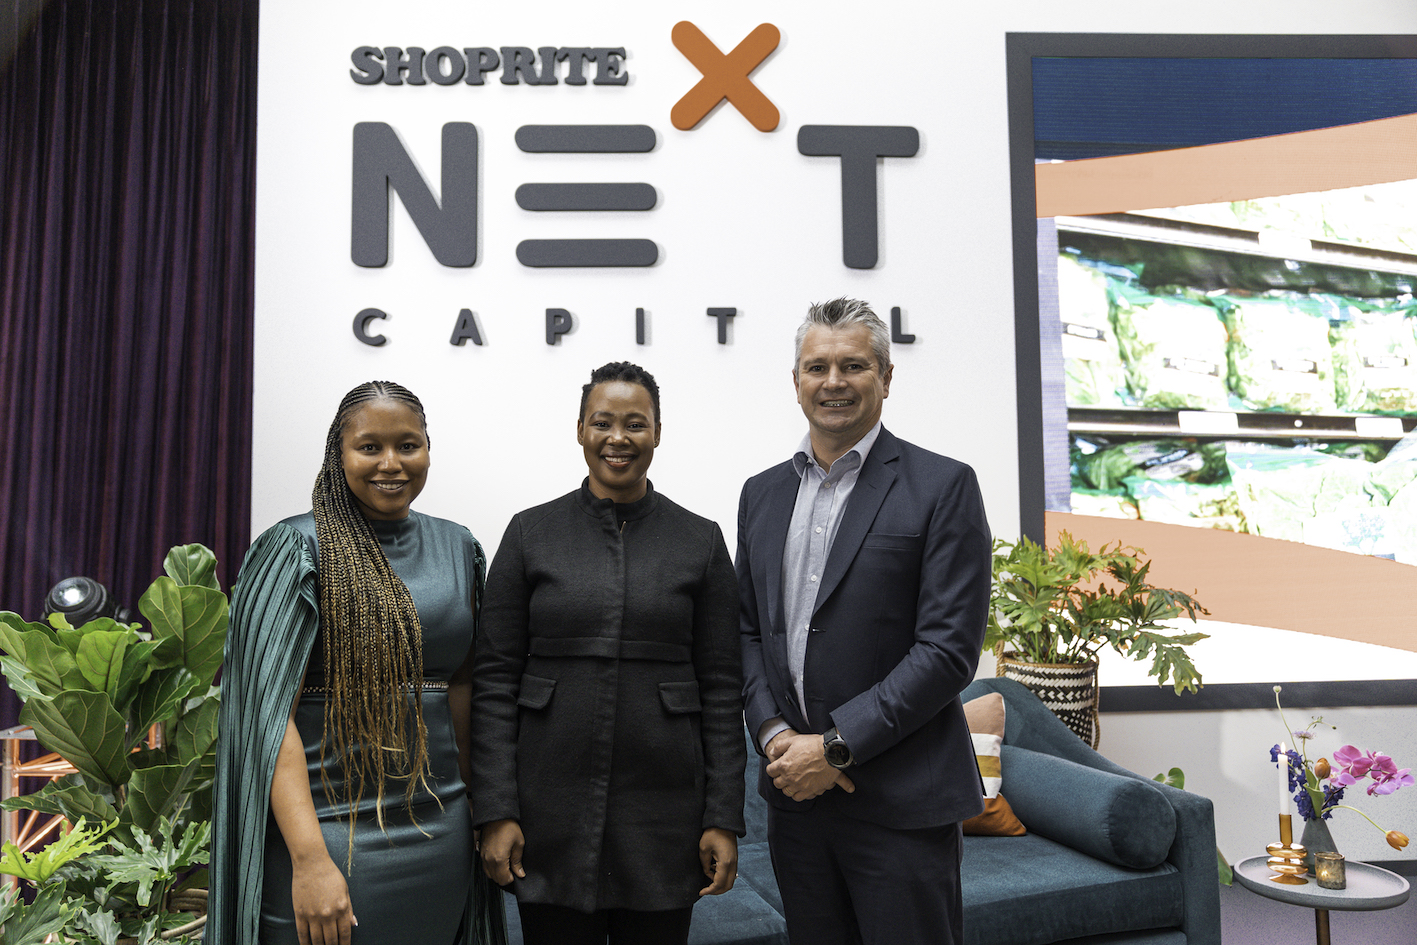 Shoprite Next Capital launched to further develop SMME partners